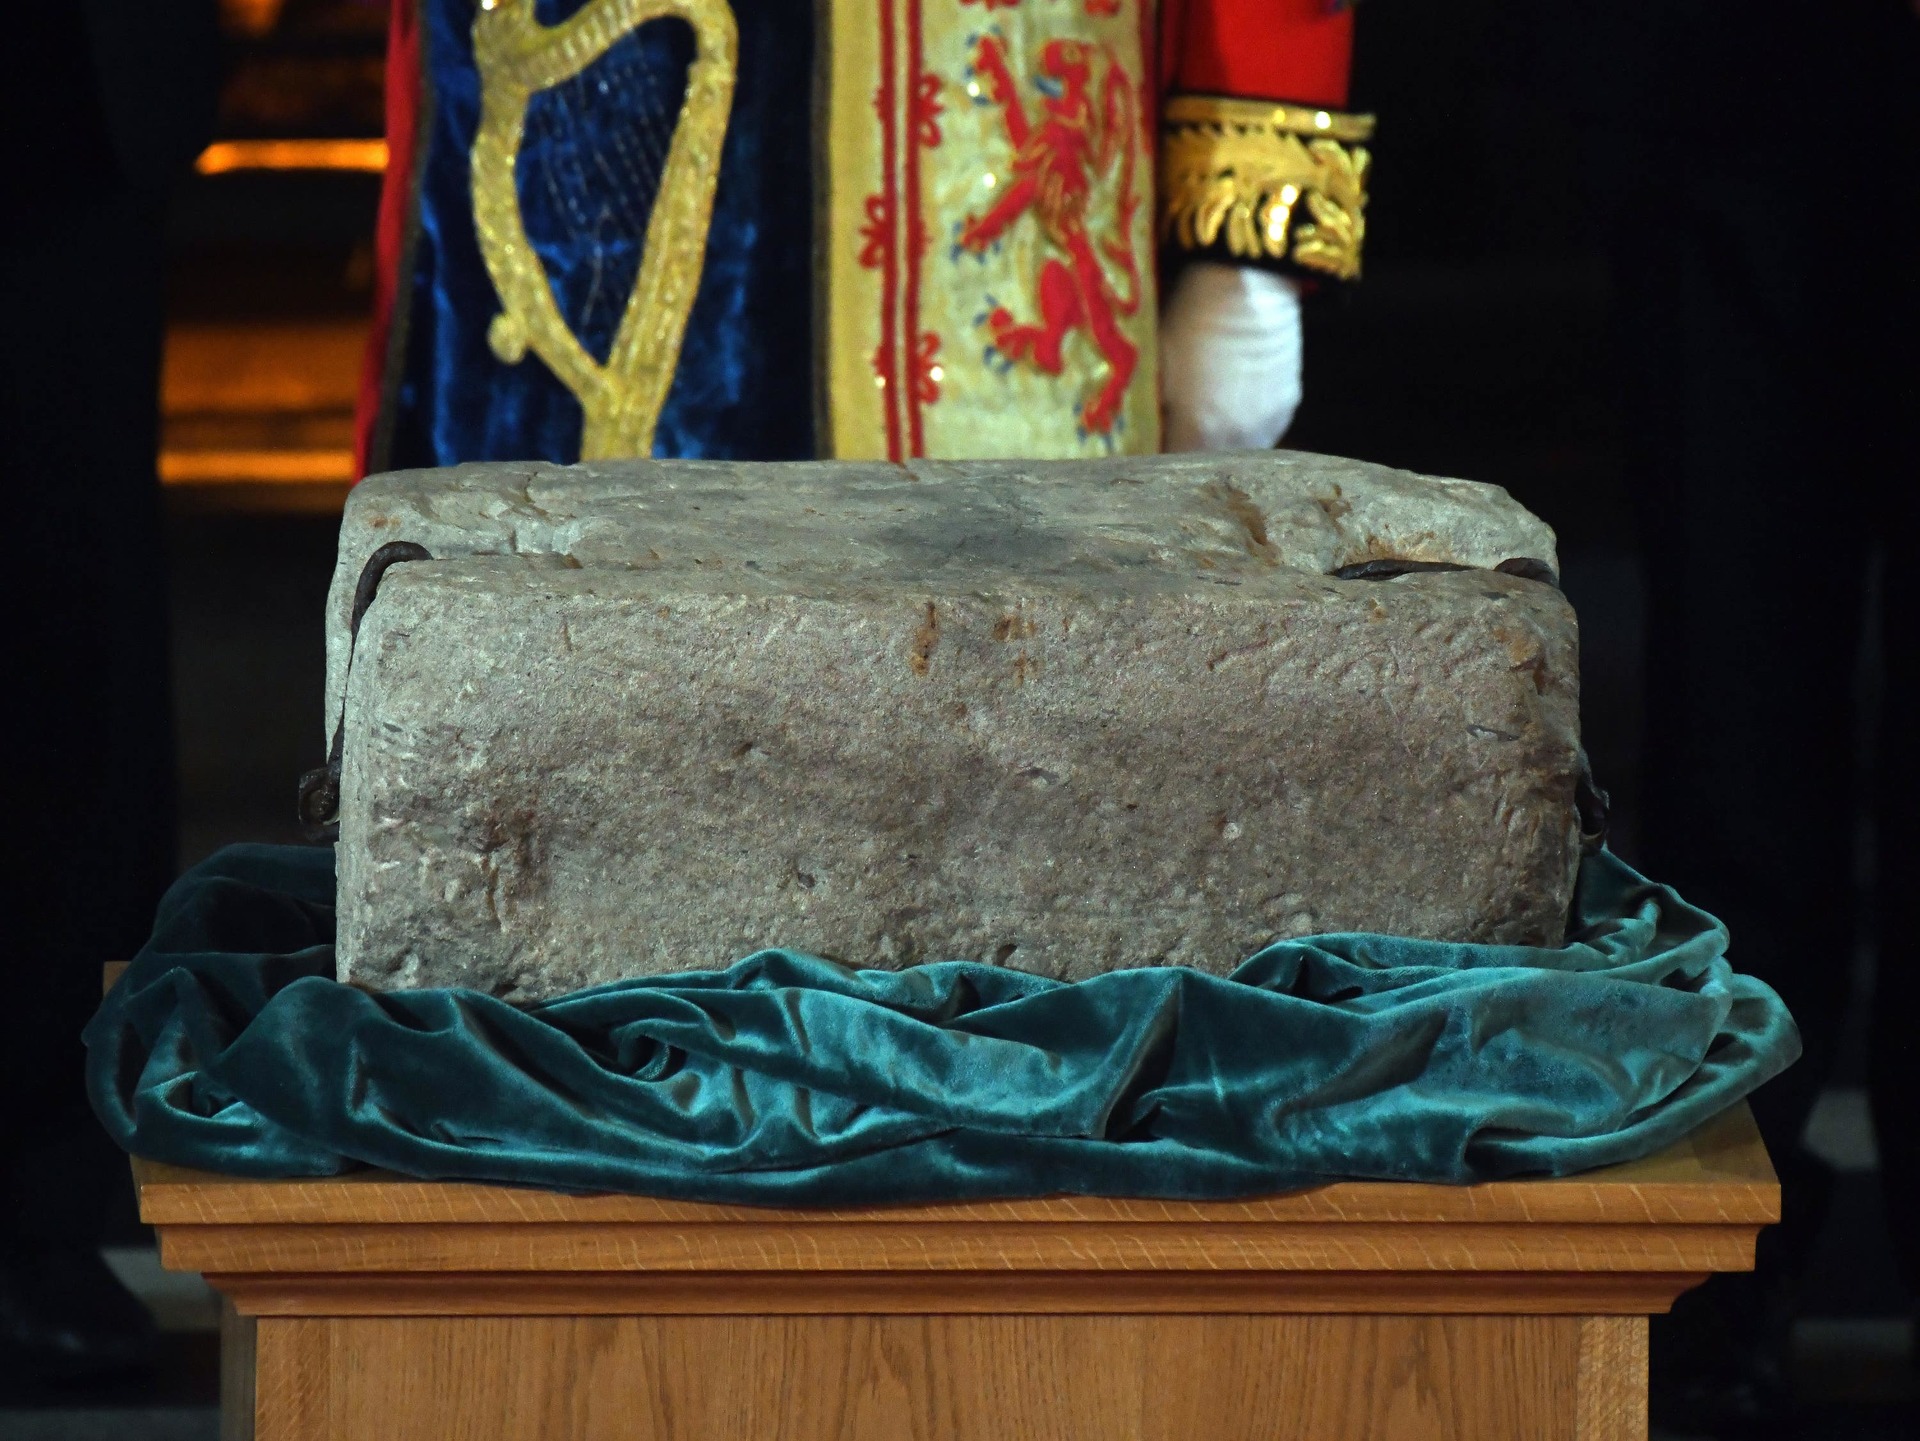 The story of the Stone of Destiny goes back centuries.